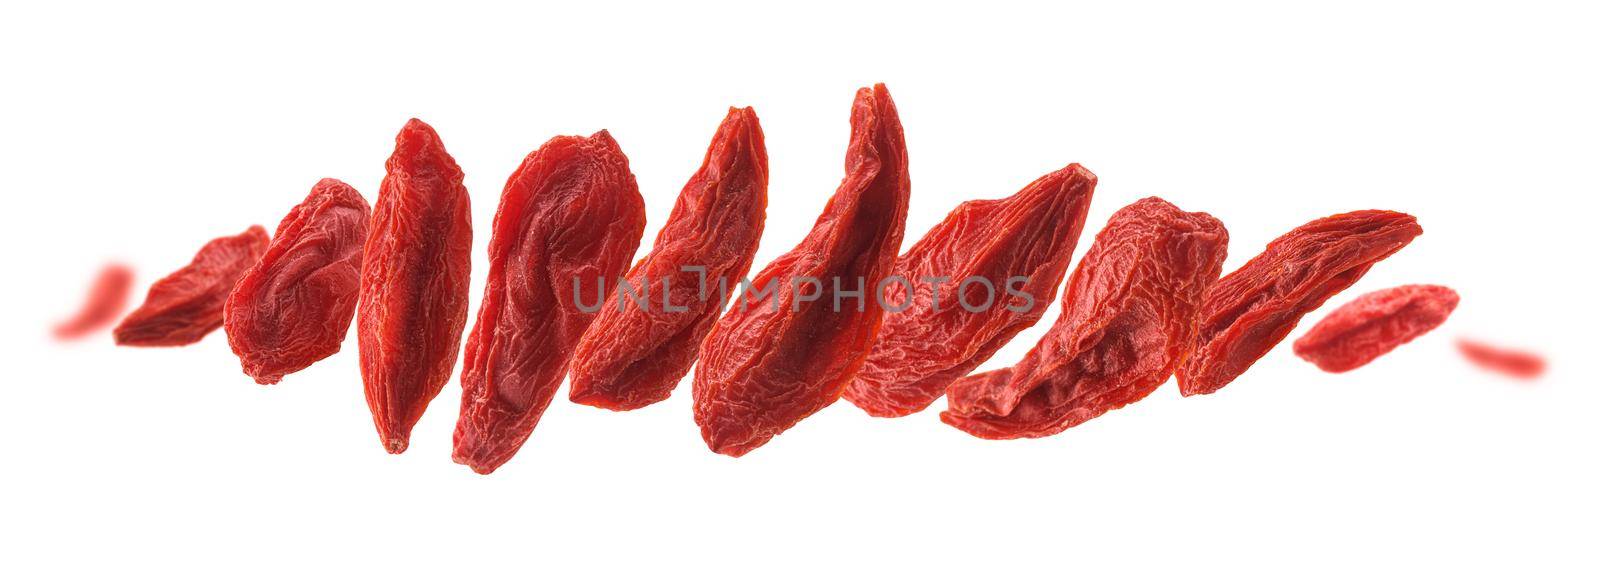 Dry Goji berries levitate on a white background by butenkow